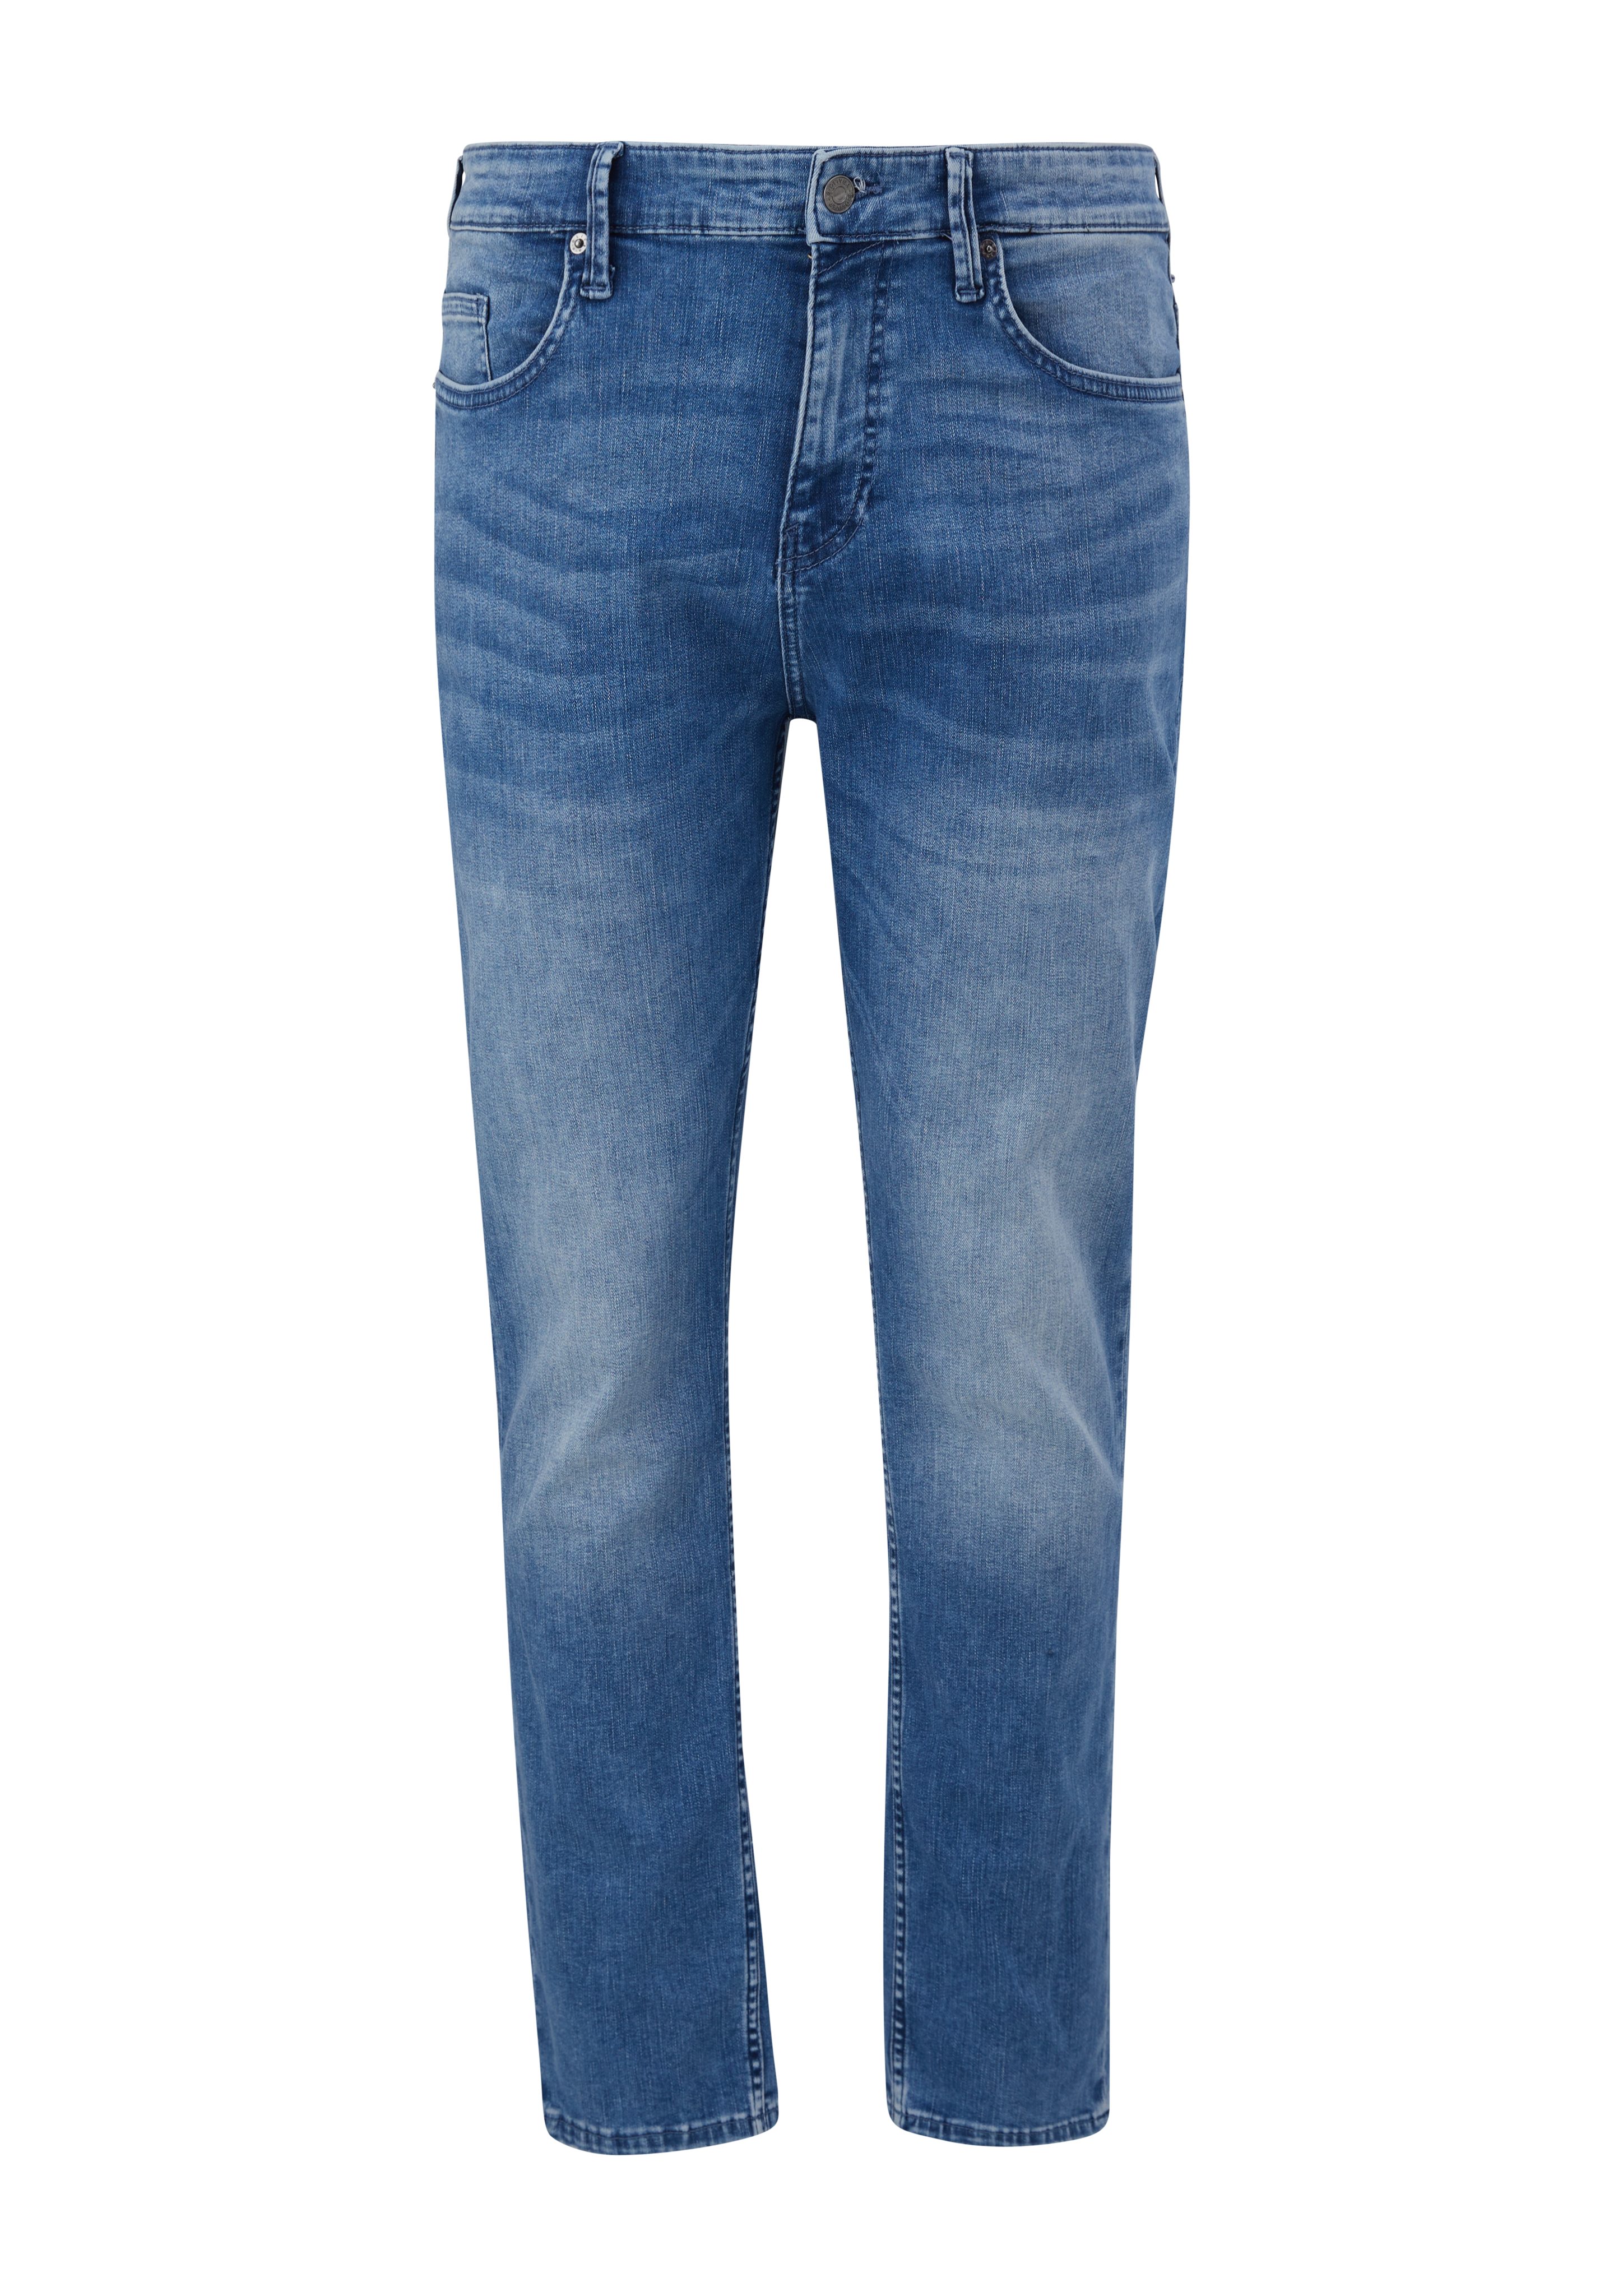 Mid Rise / Casby / Straight Leg Relaxed / Stoffhose s.Oliver Jeans Fit Waschung ozeanblau